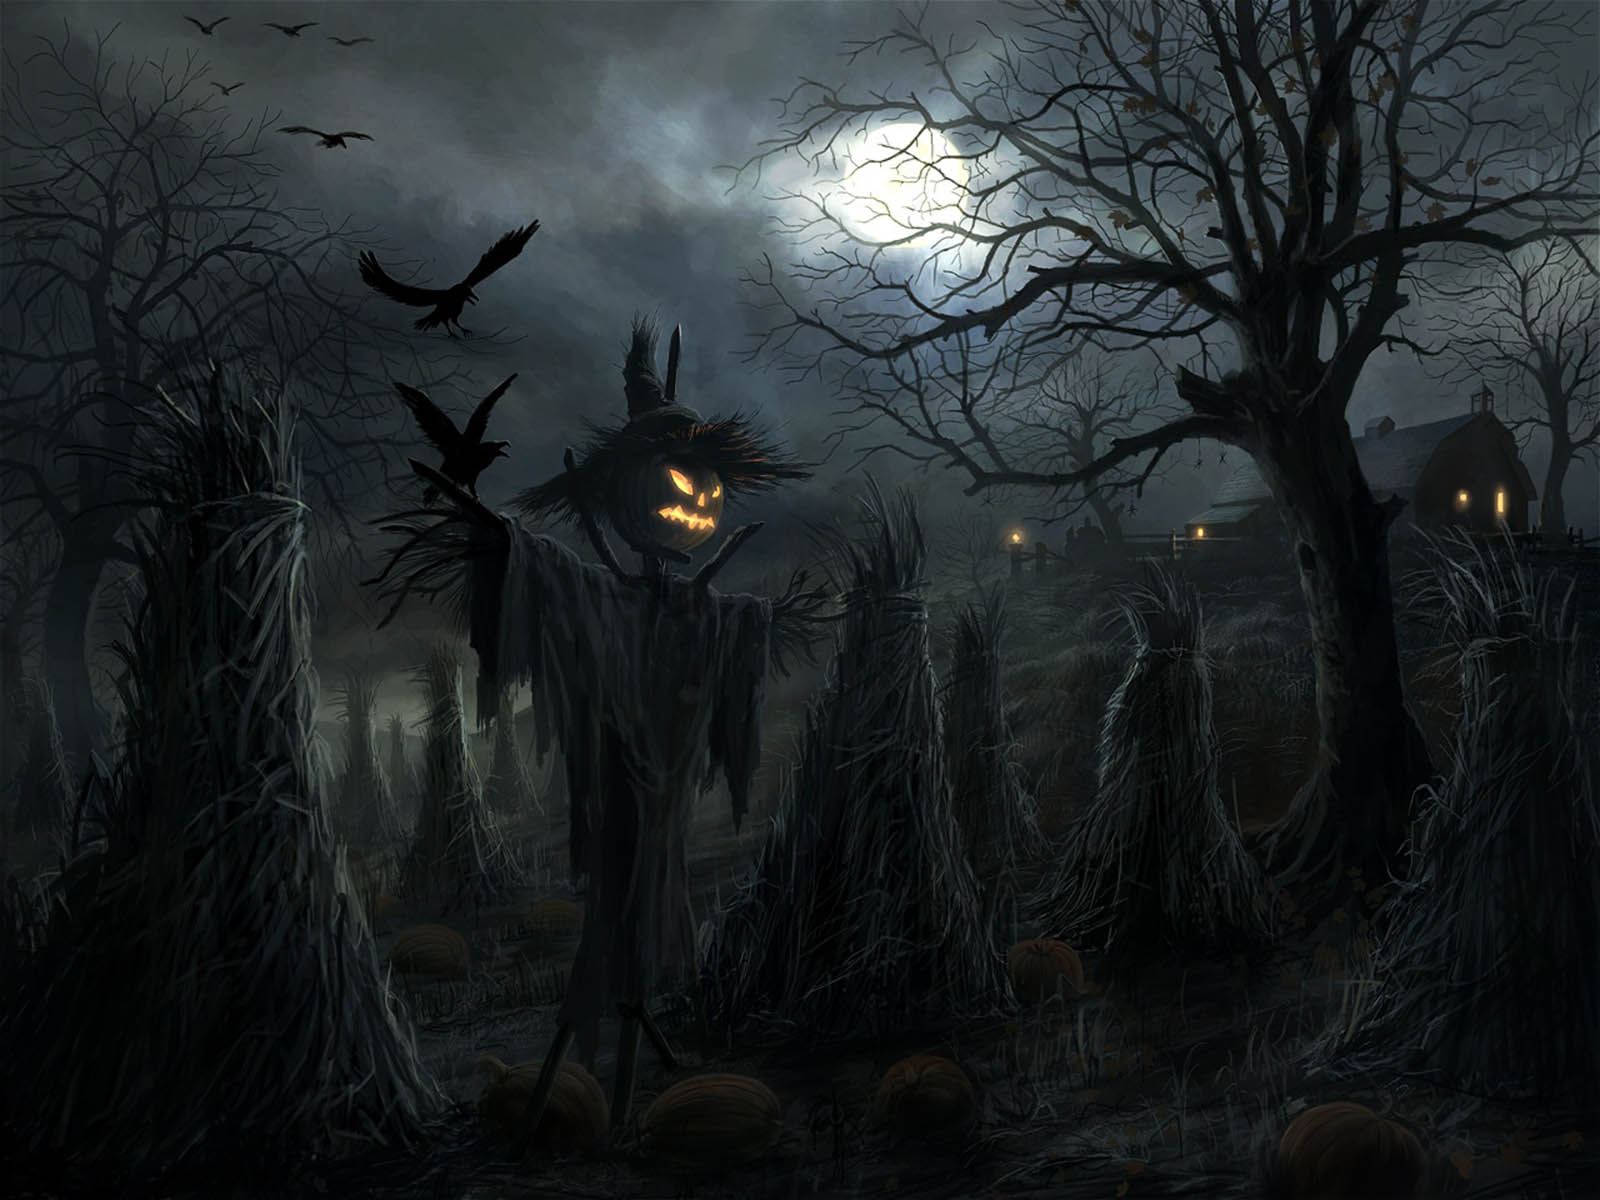 Tag Halloween Wallpapers Images Photos Pictures and Backgrounds